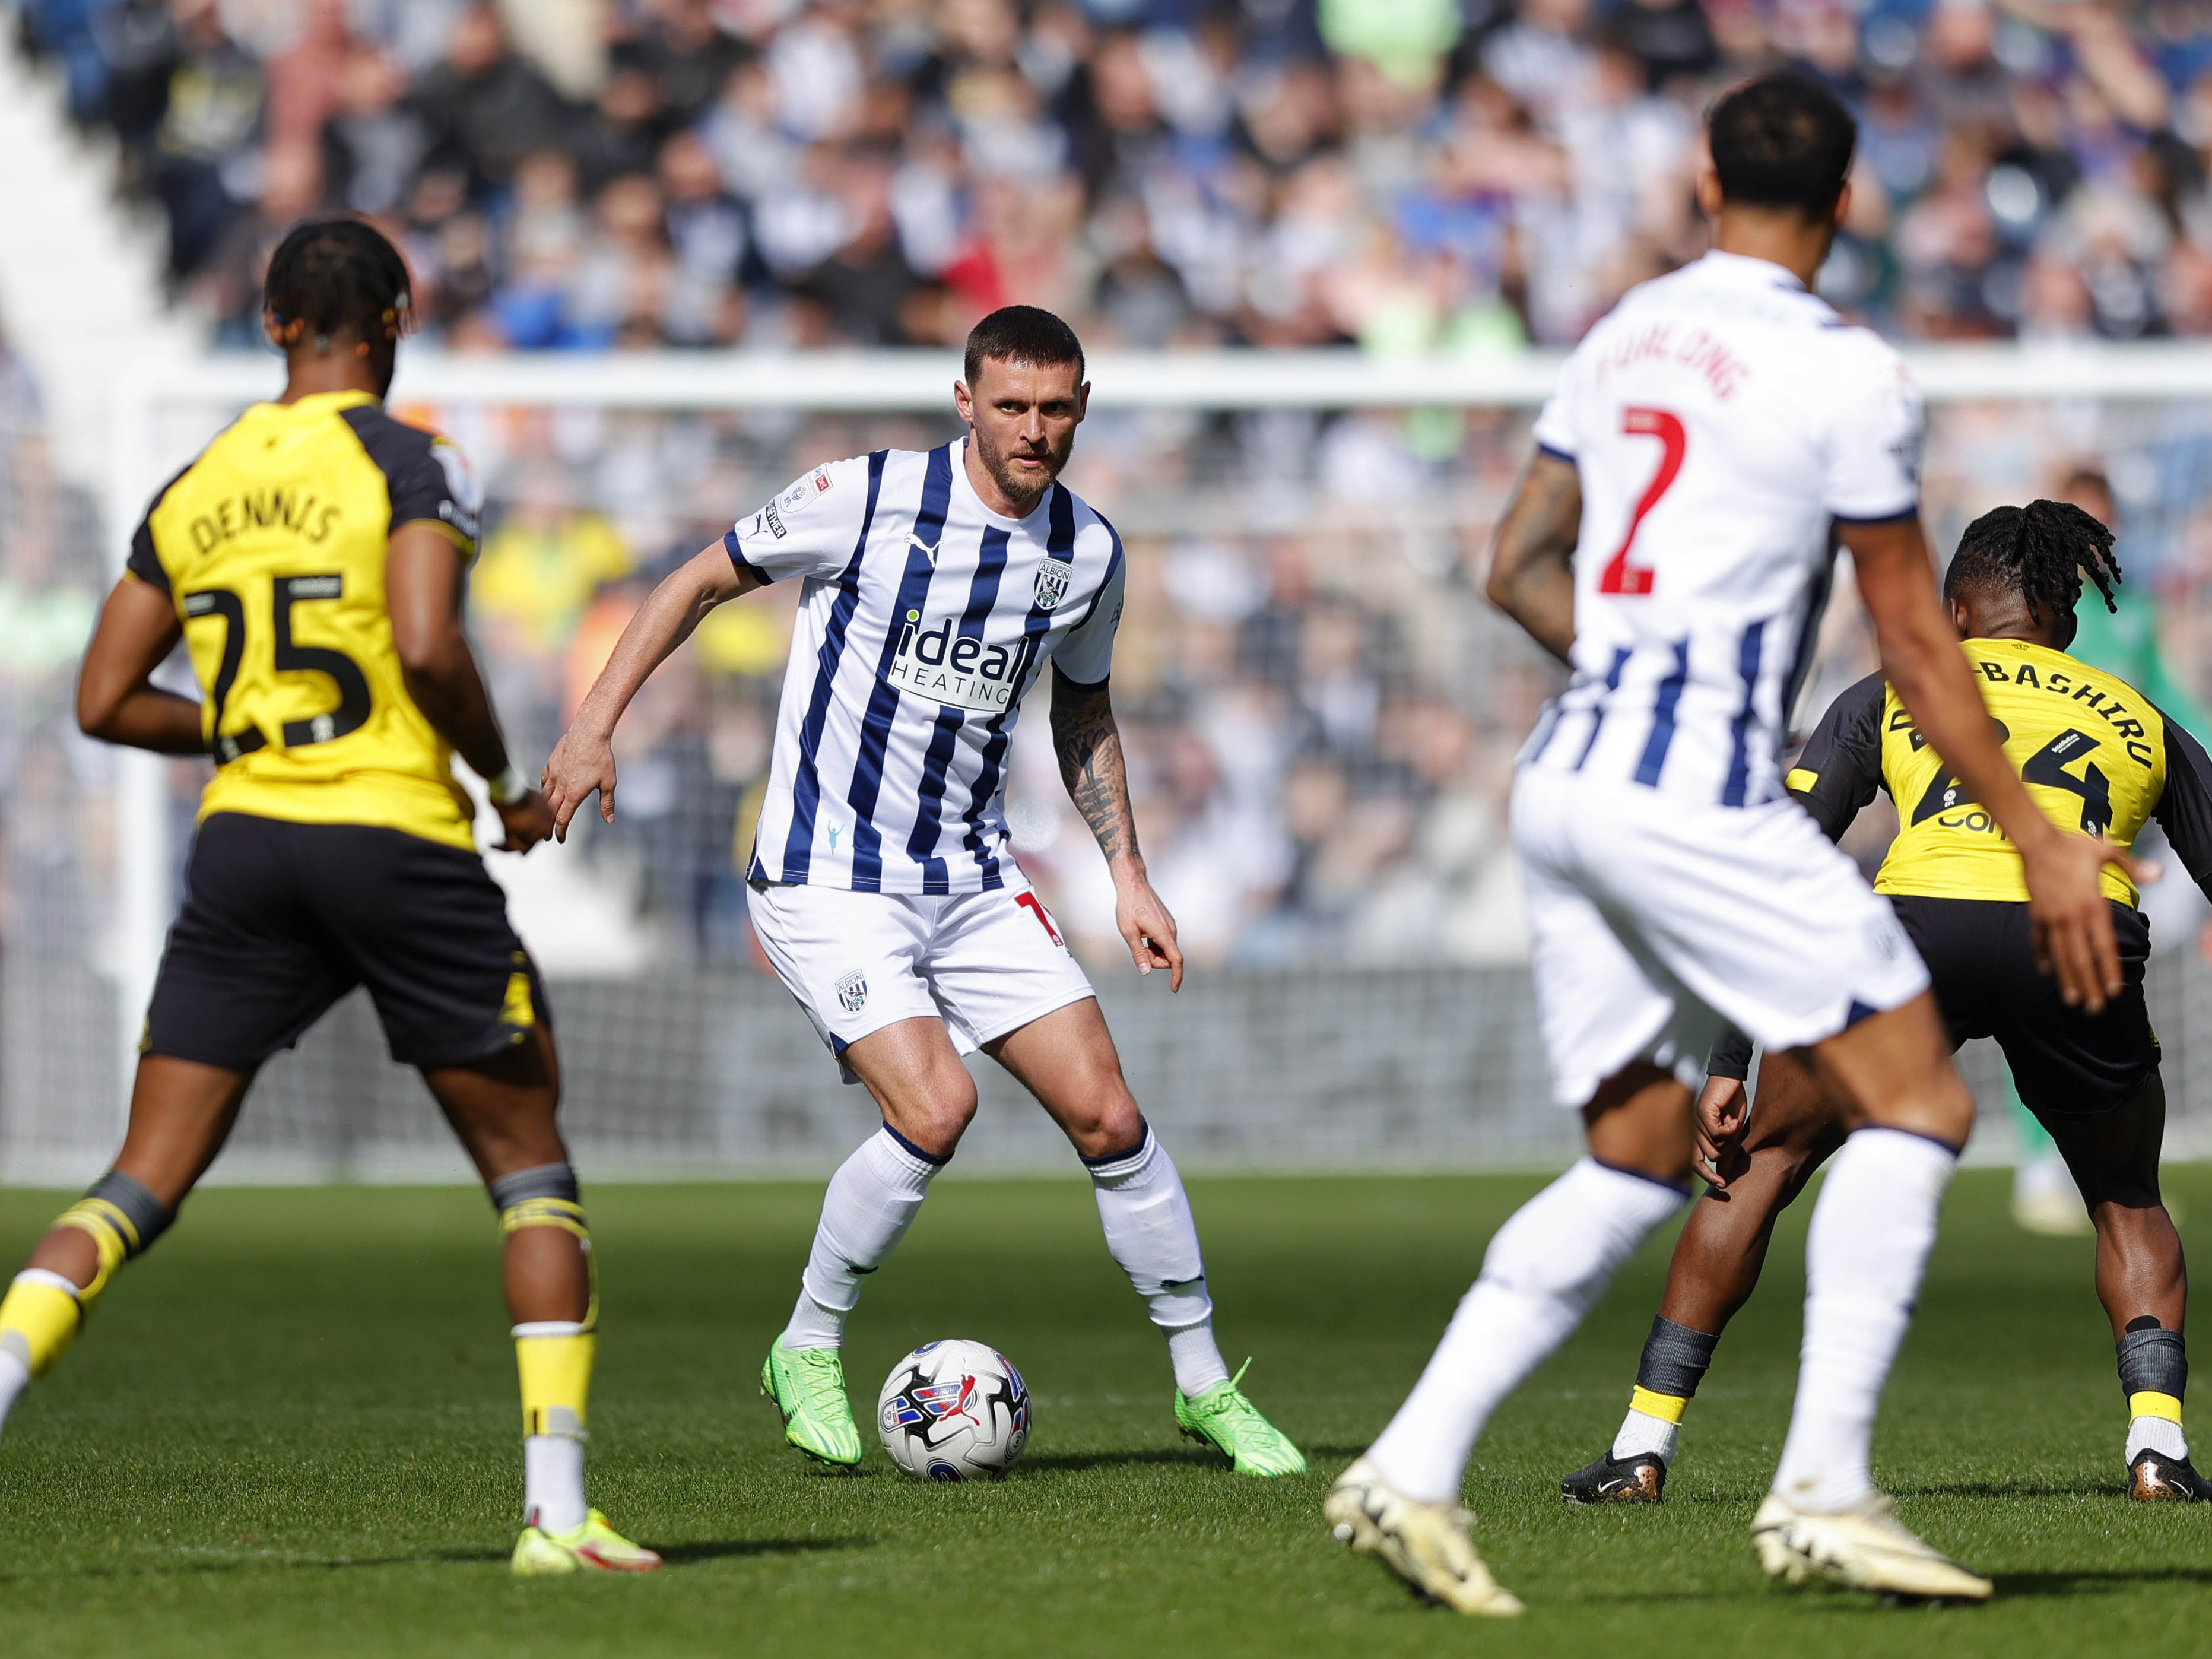 John Swift on the ball against Watford at The Hawthorns